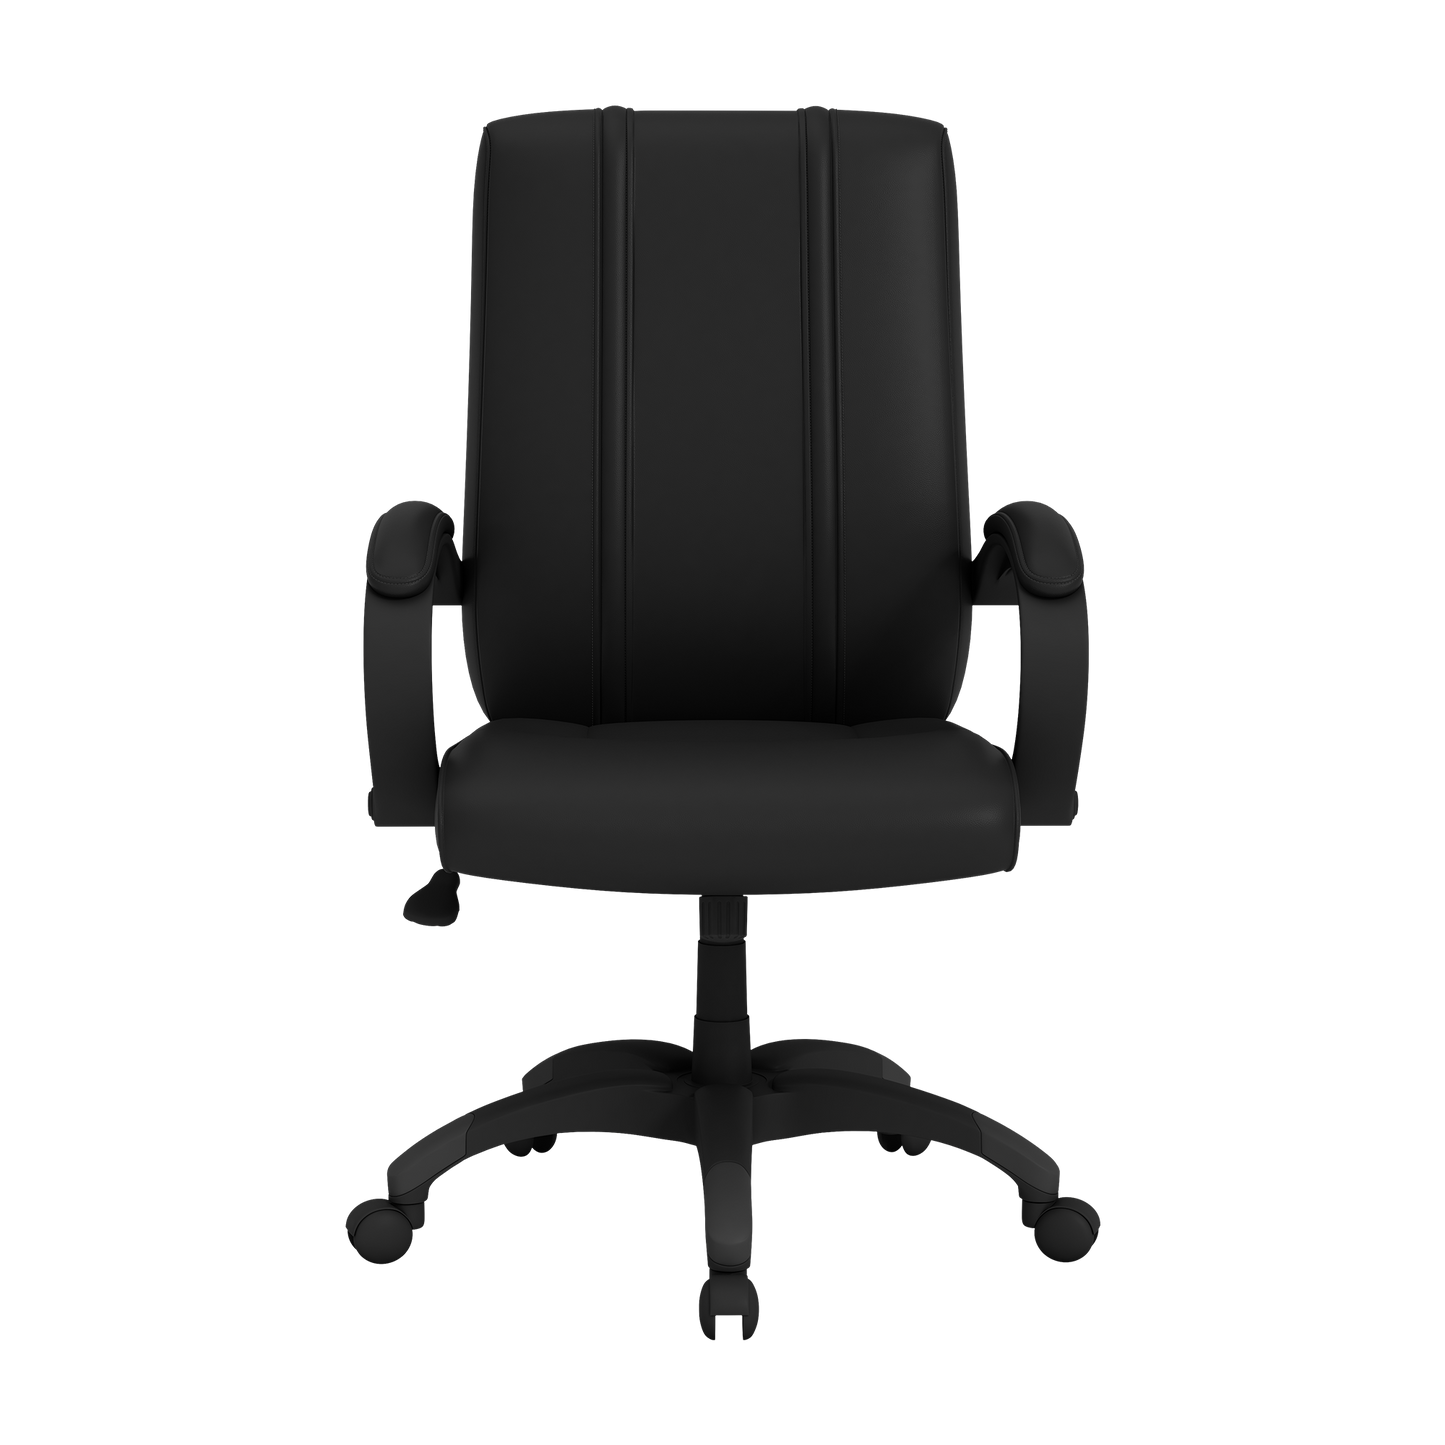 Office Chair 1000 with Houston Rockets Logo